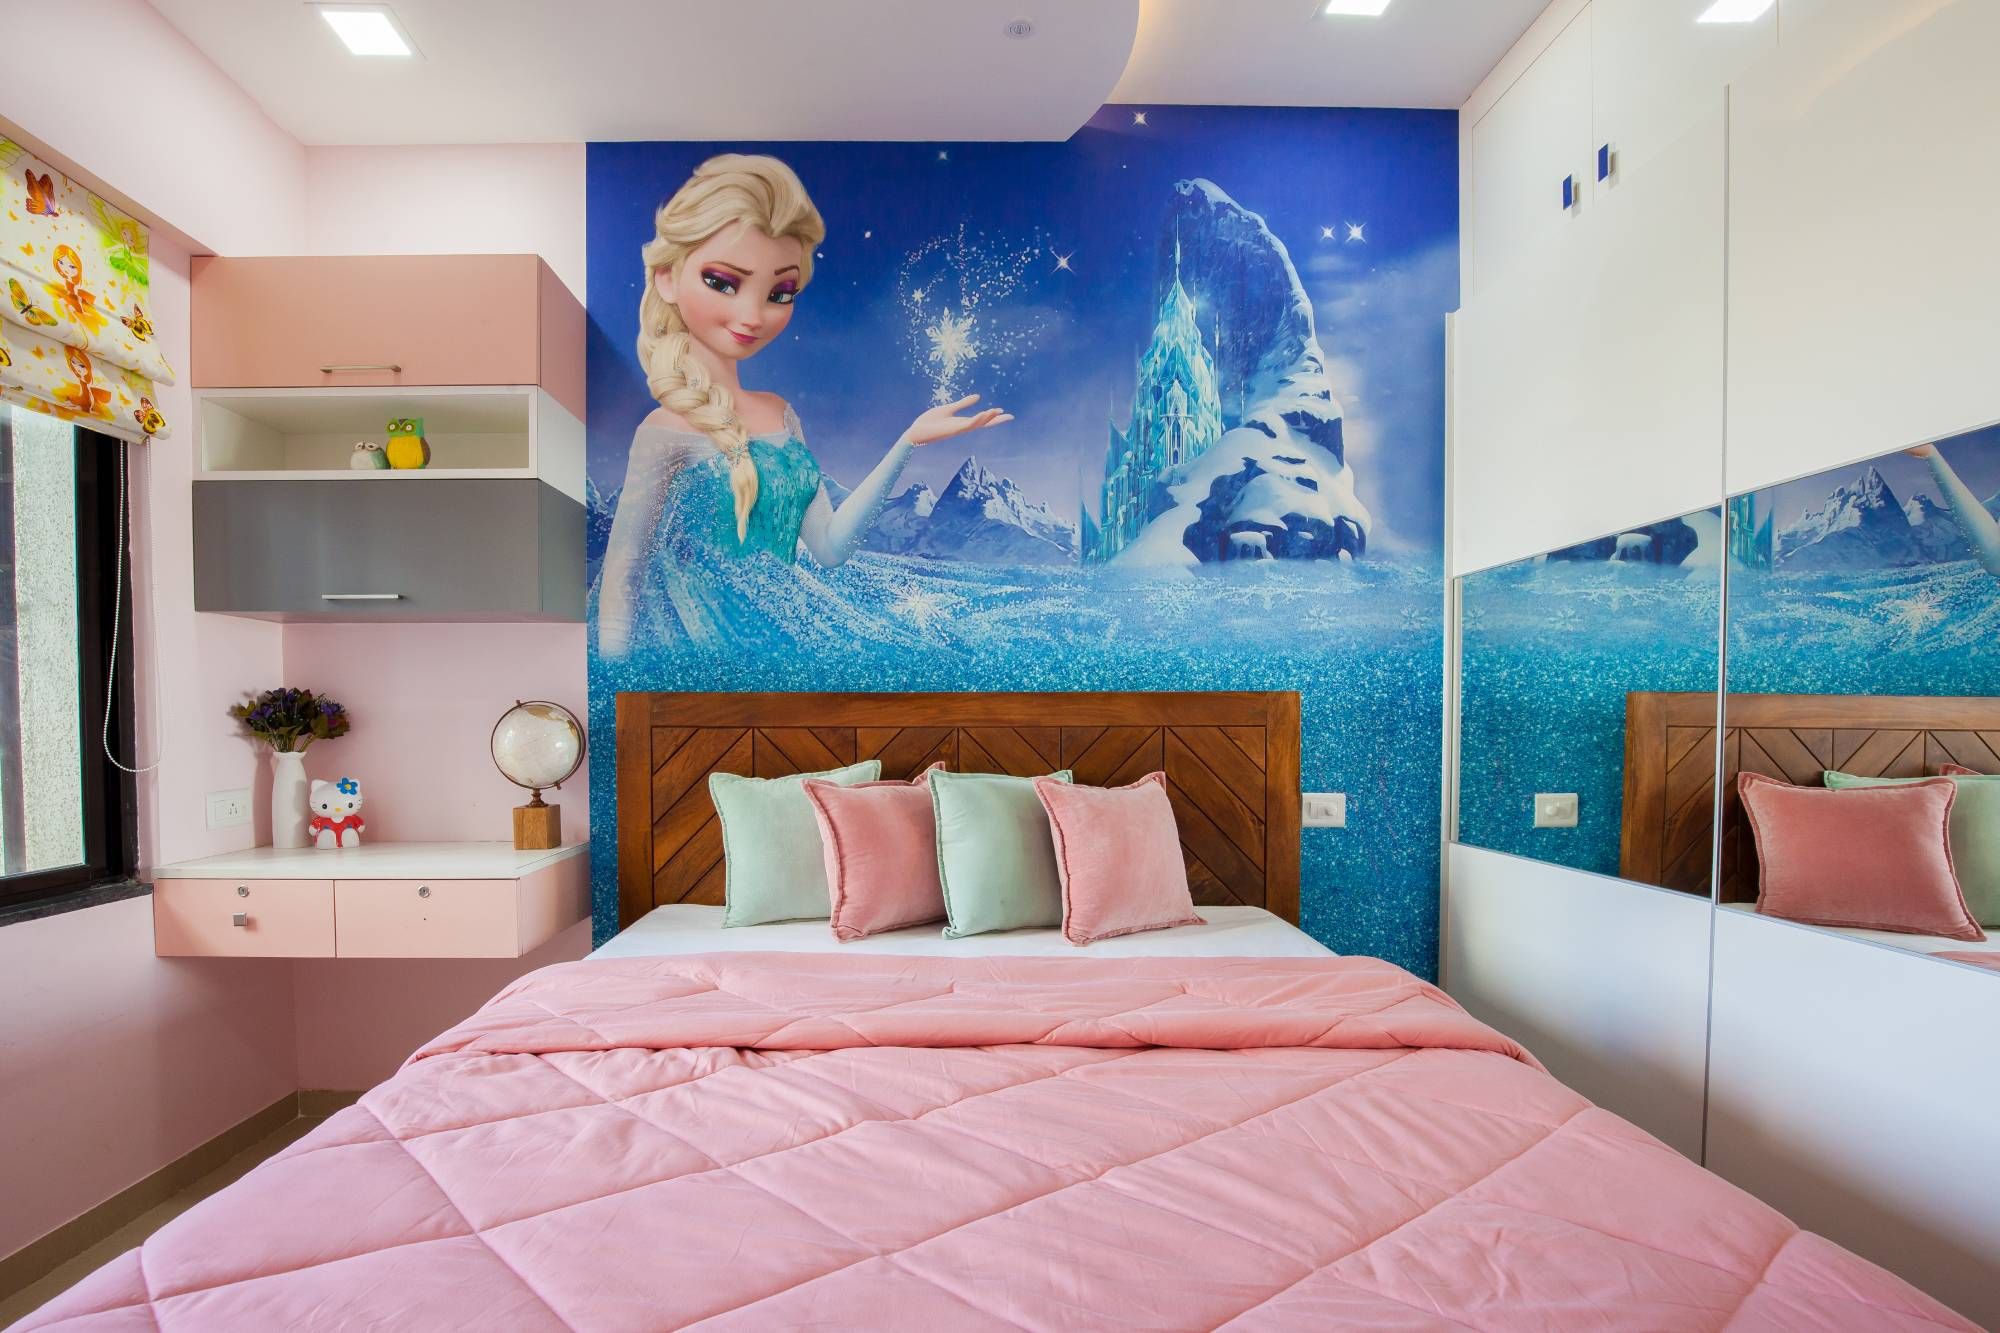 100+ Beautiful Girls Room Design That Your Kid Will Love - Livspace